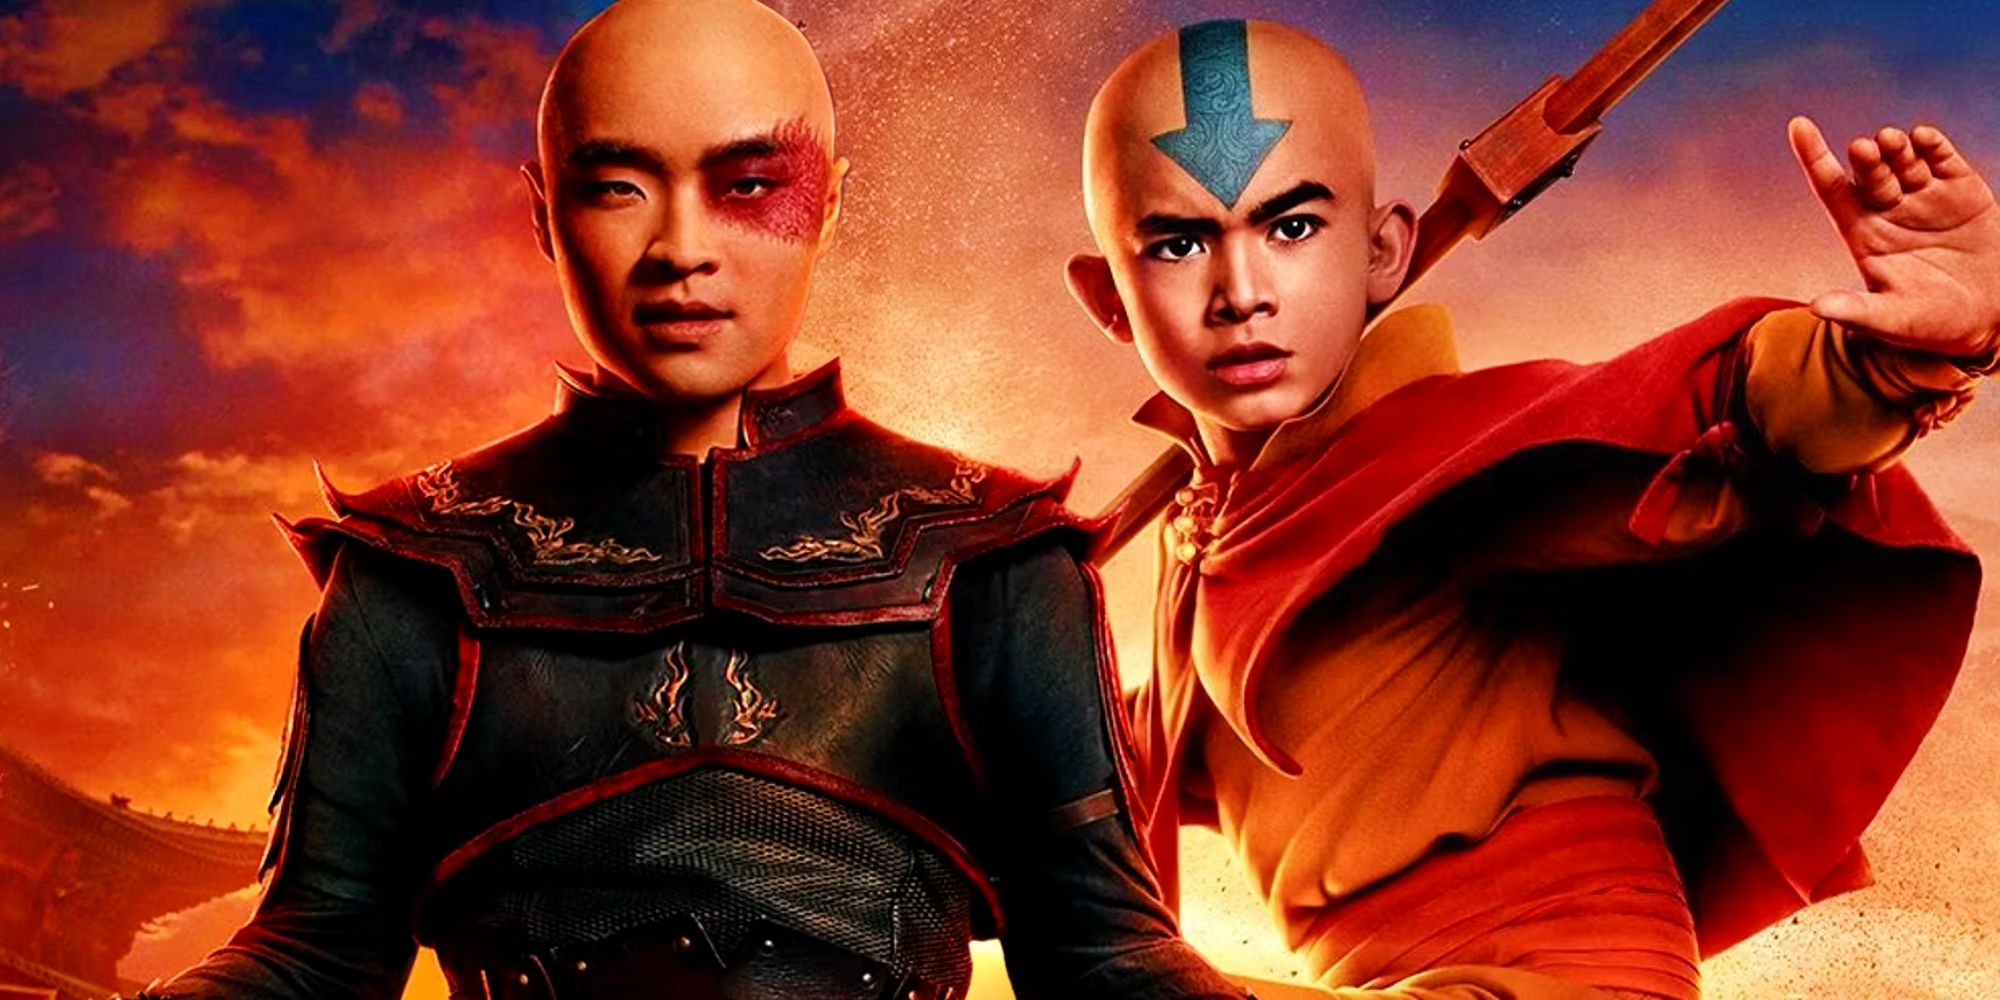 Zuko and Aang in their character posters for Netflix's The Last Airbender